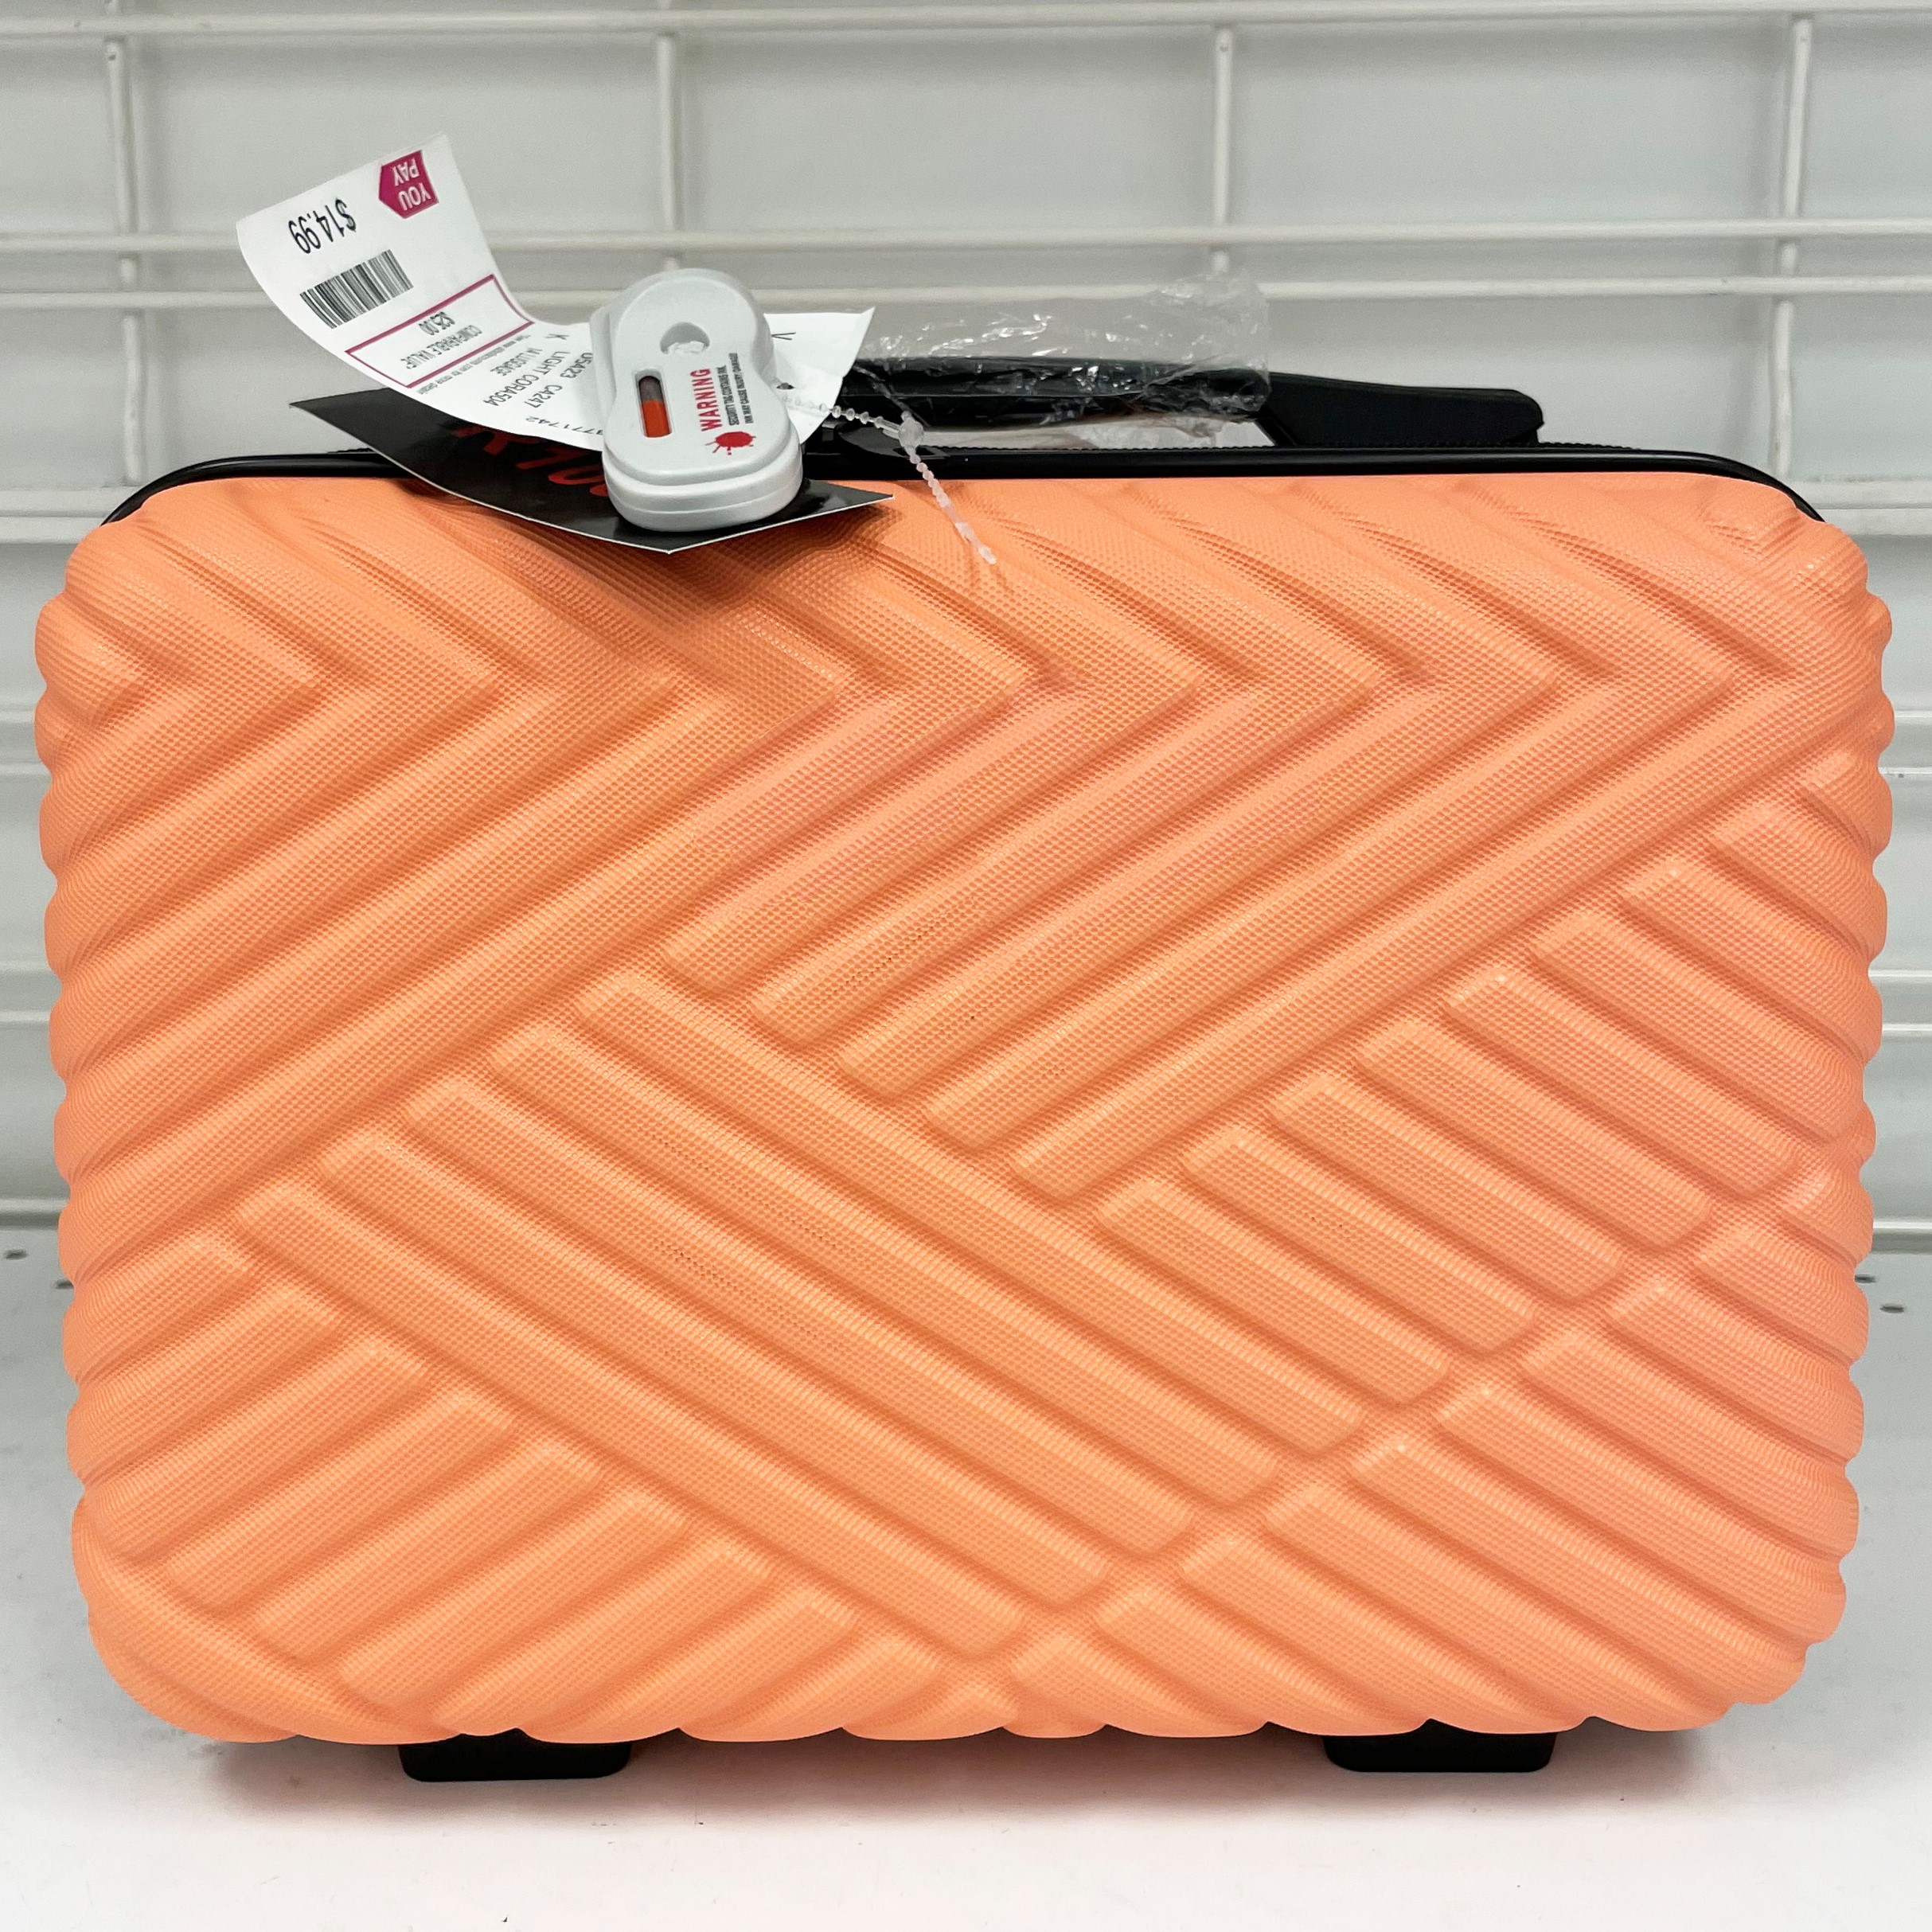 Low price, high quality tangerine color carrying case from dd's discounts.